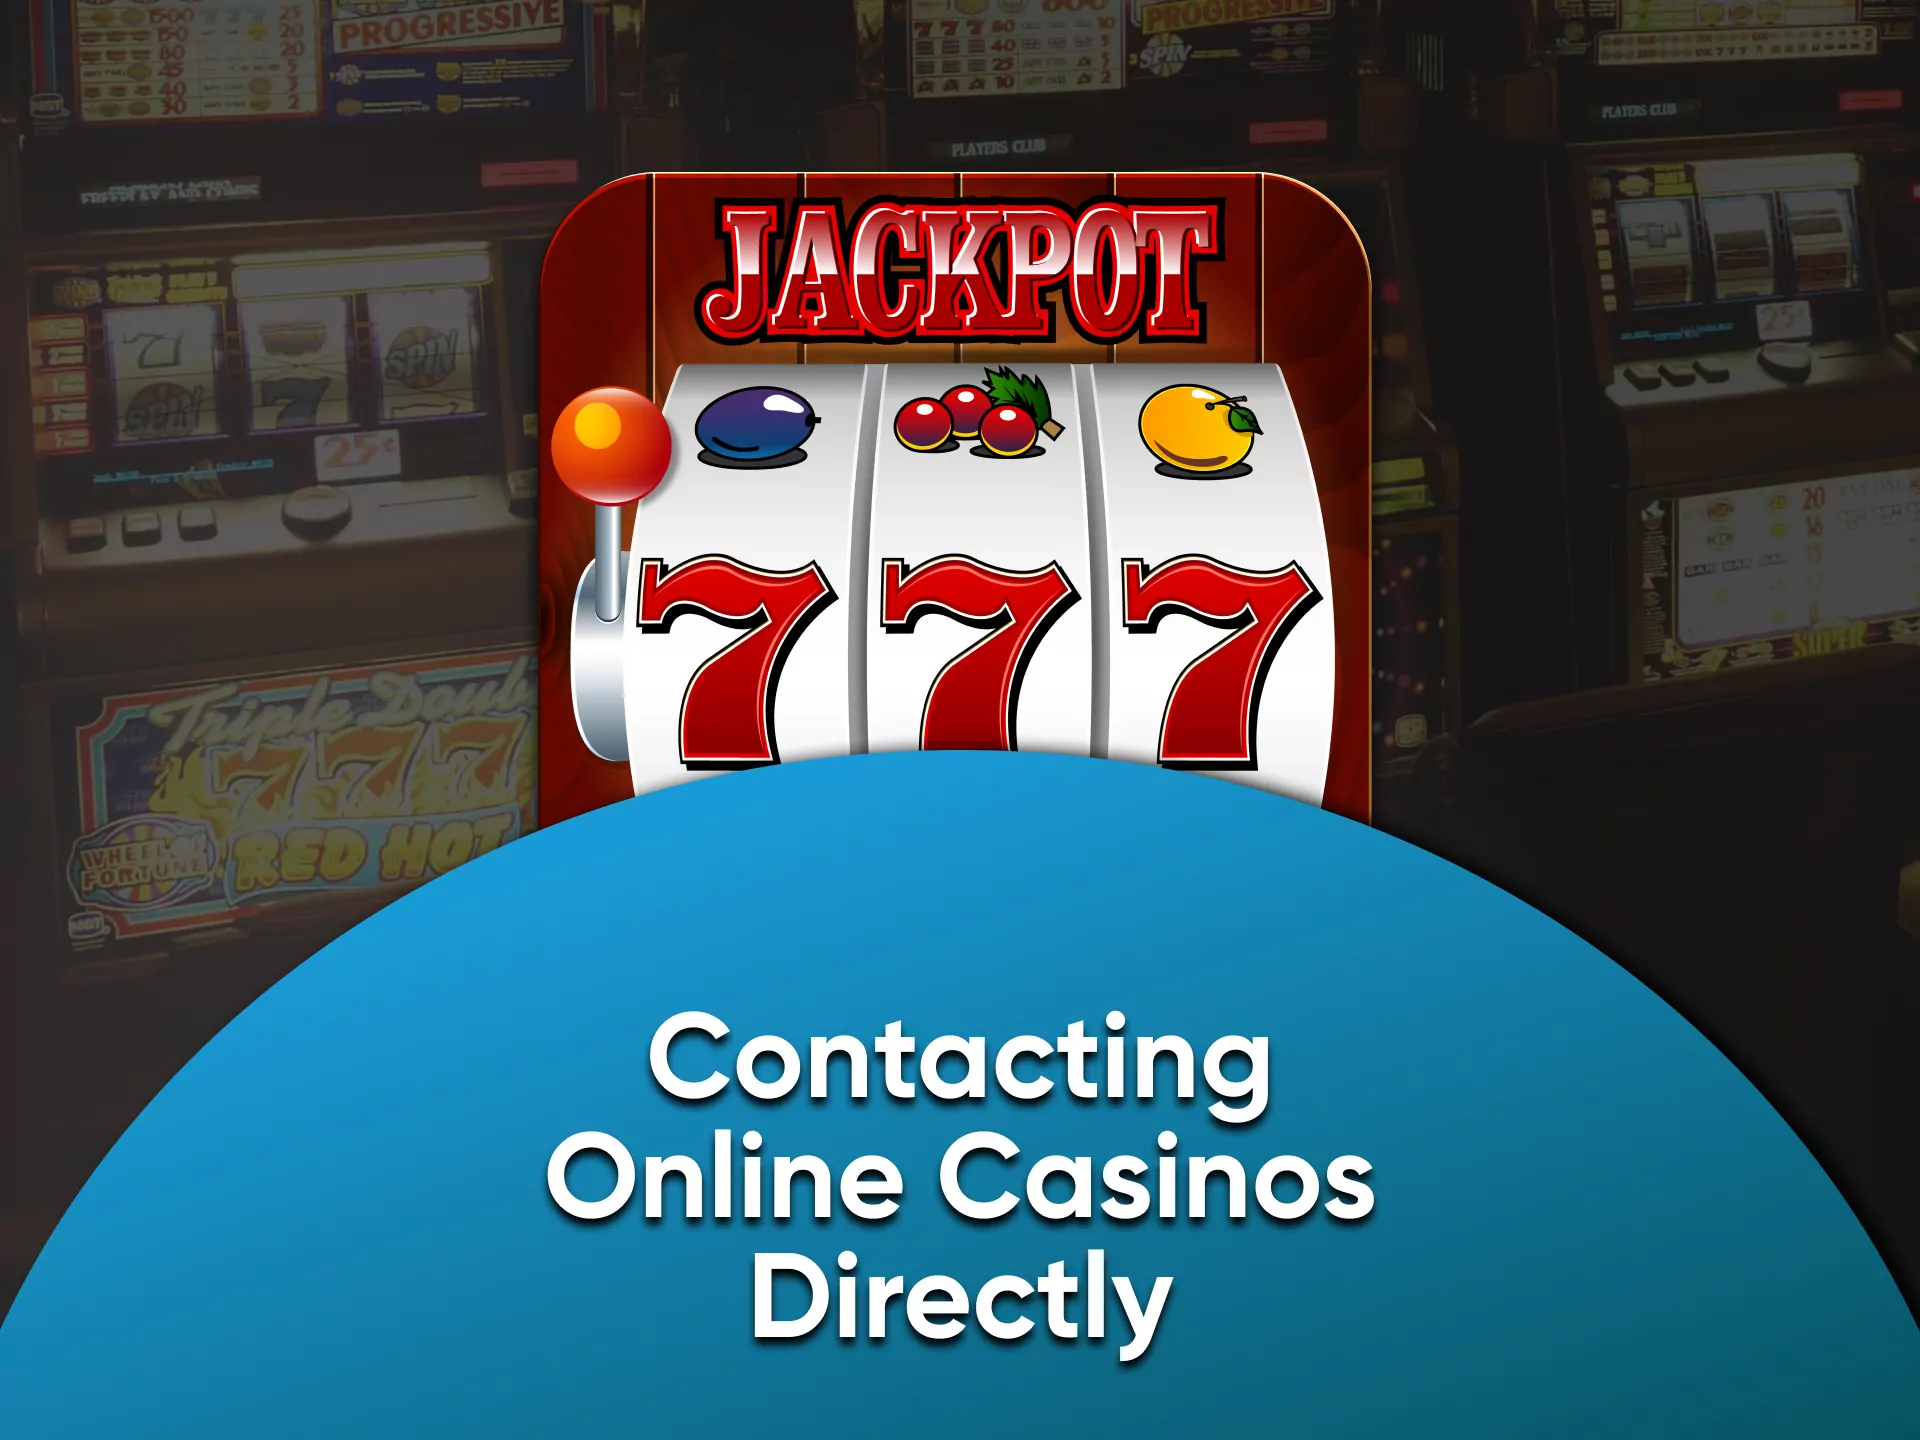 If you have any problems with playing slots online, please contact technical support.